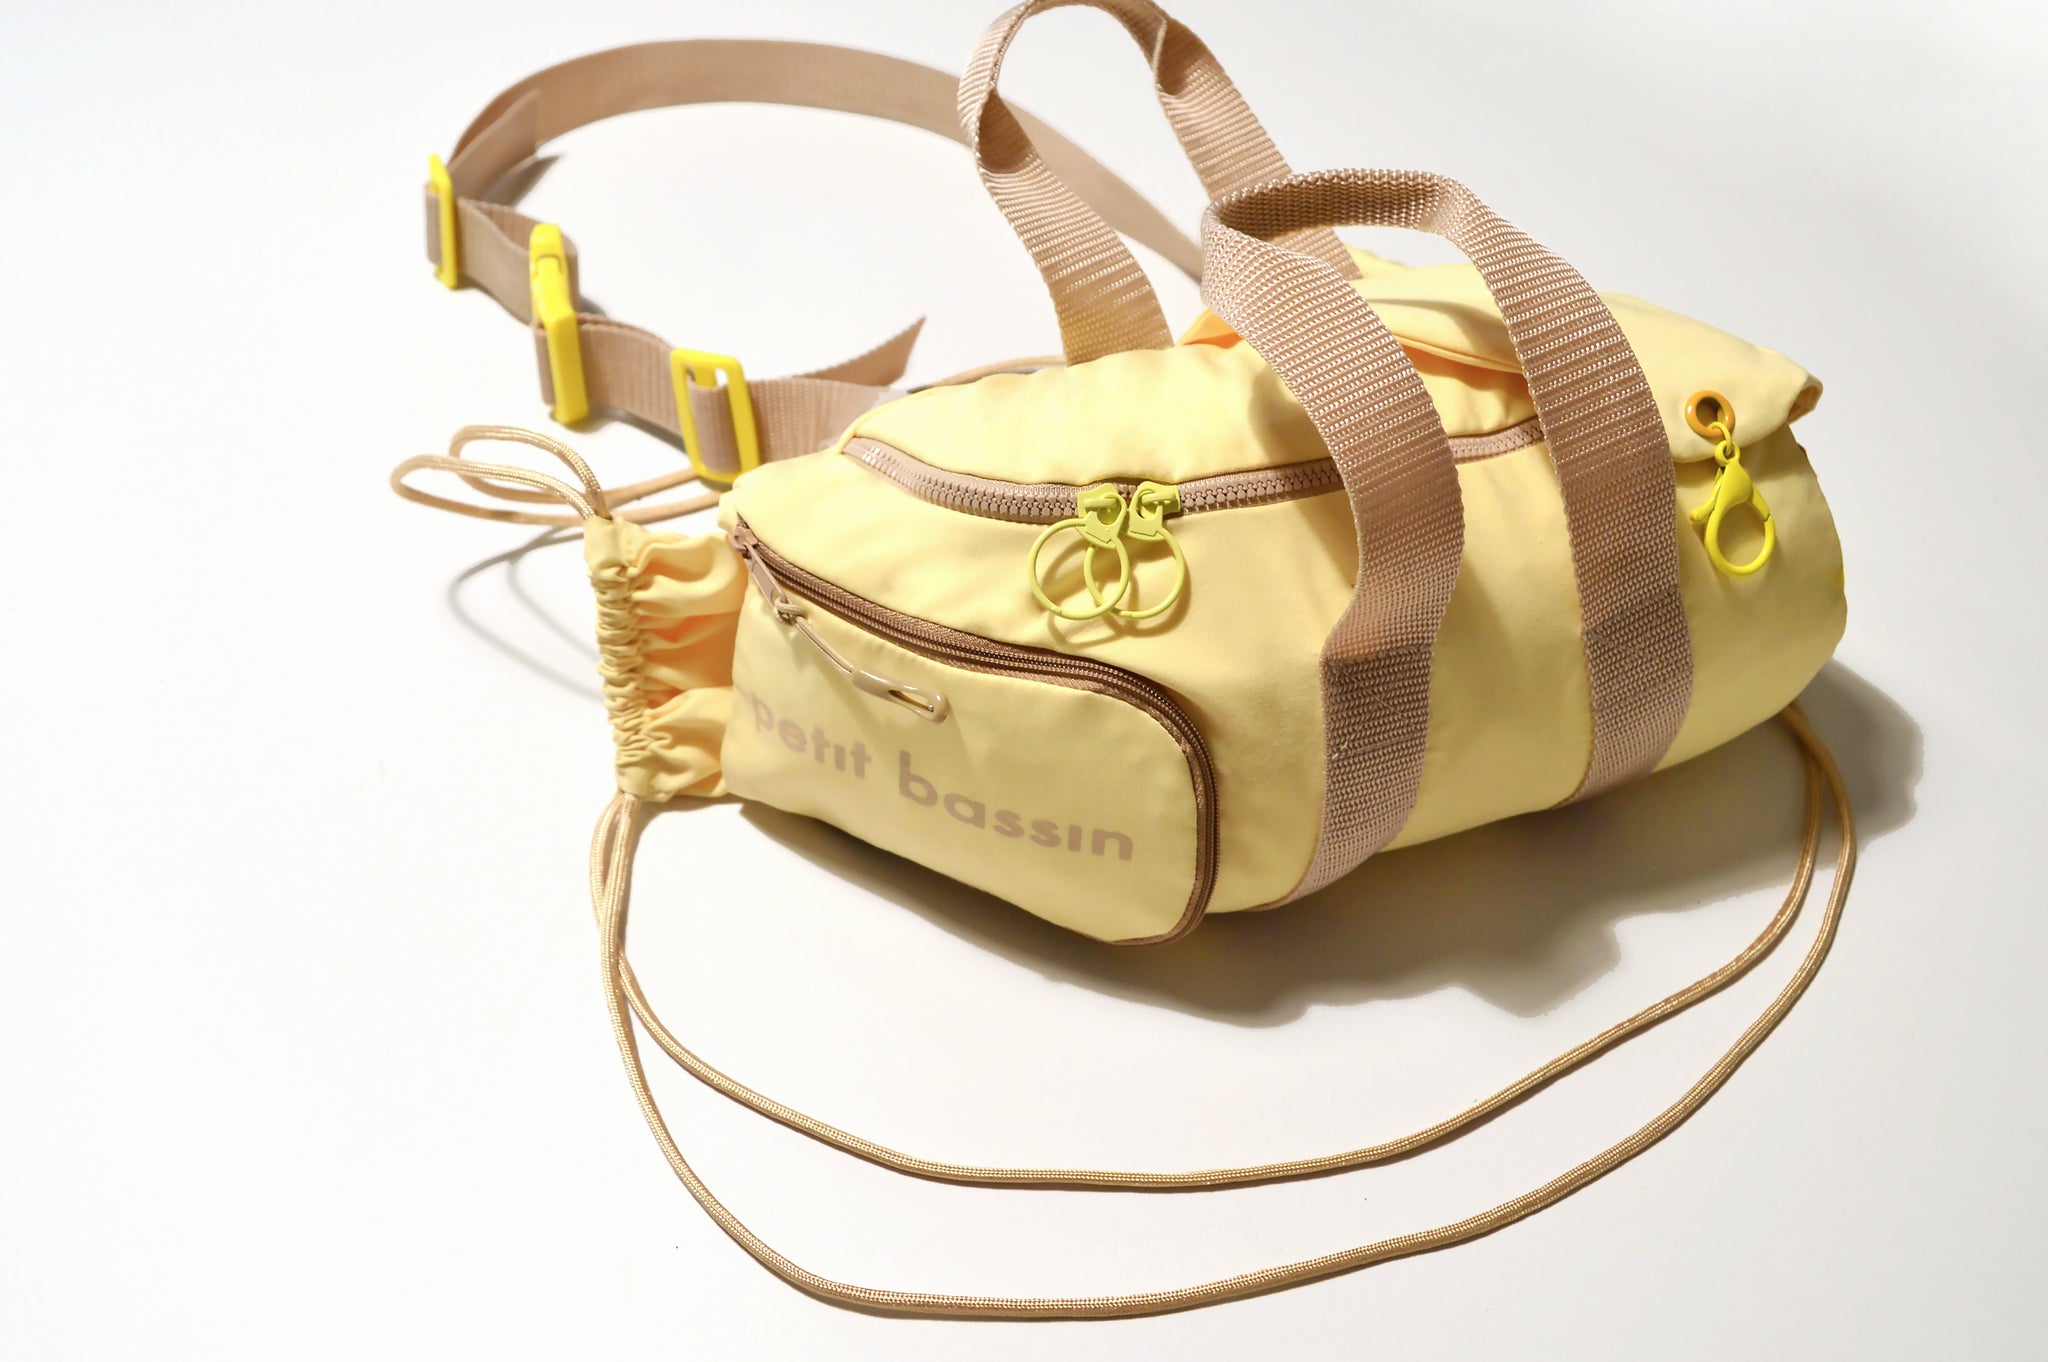 SOLD OUT - 'PETIT BASSIN §2' Bag